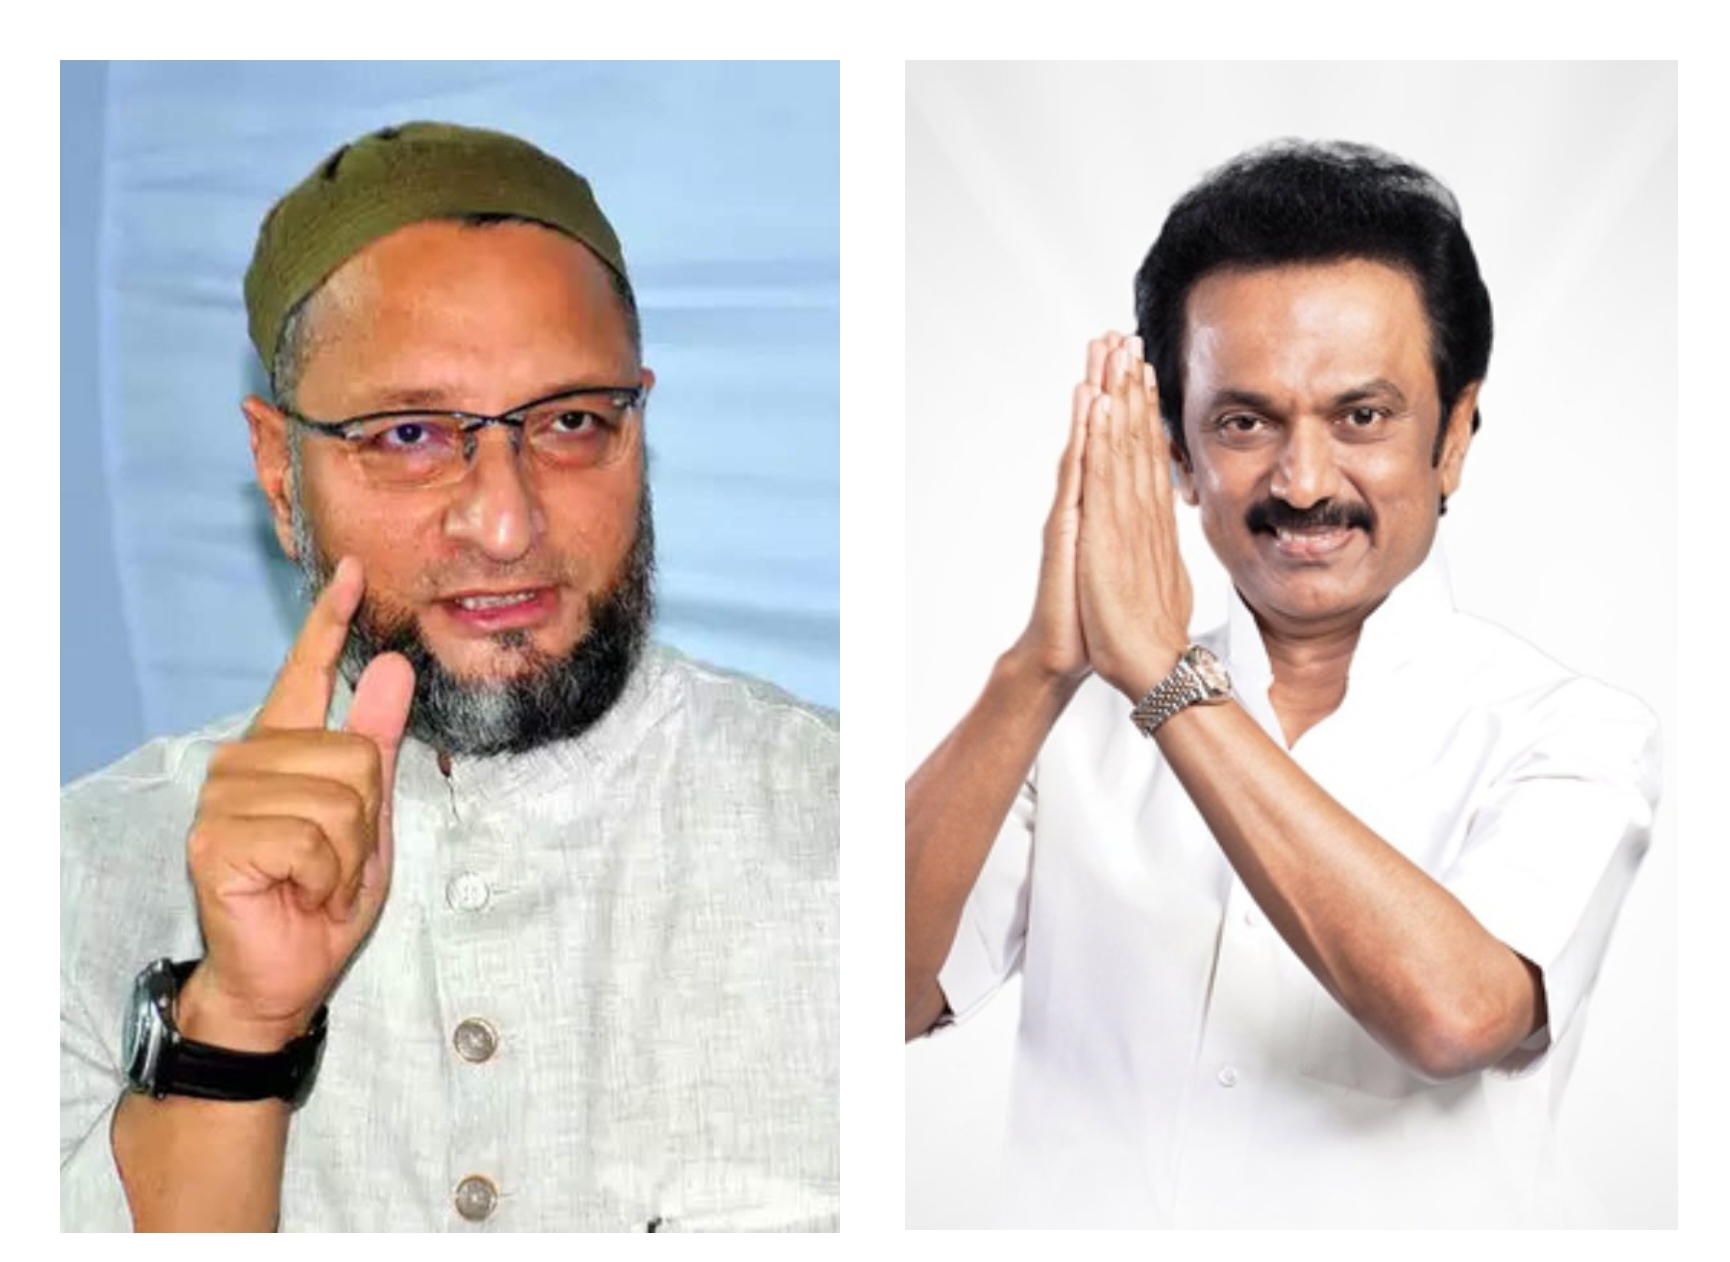 DMK stumbles in attempt to tap Owaisis support, angers allies